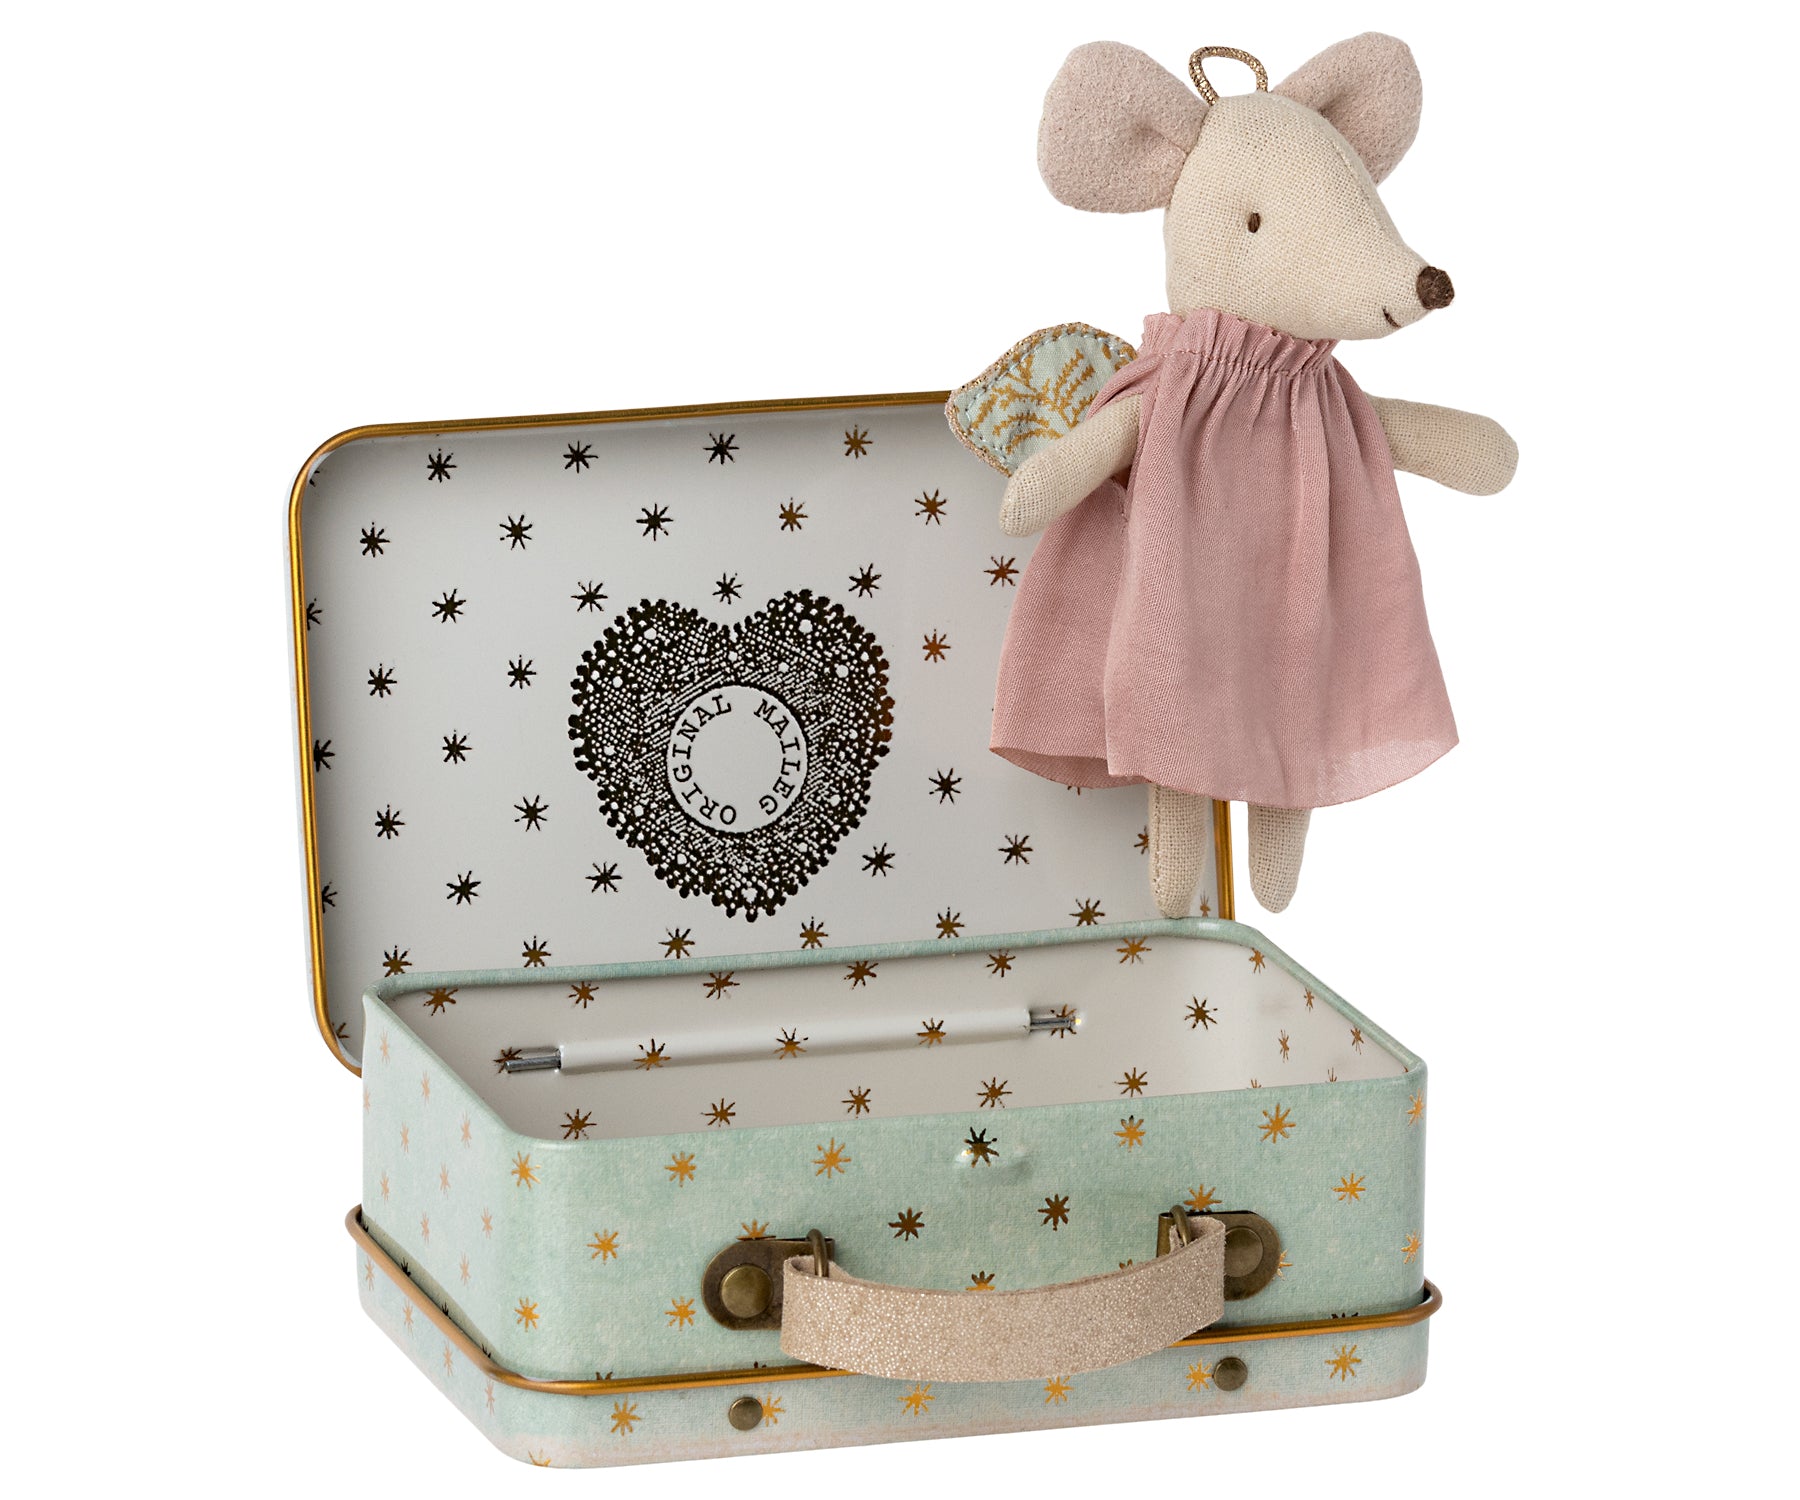 Maileg Maileg Angel Mouse in Suitcase - Pearls & Swines